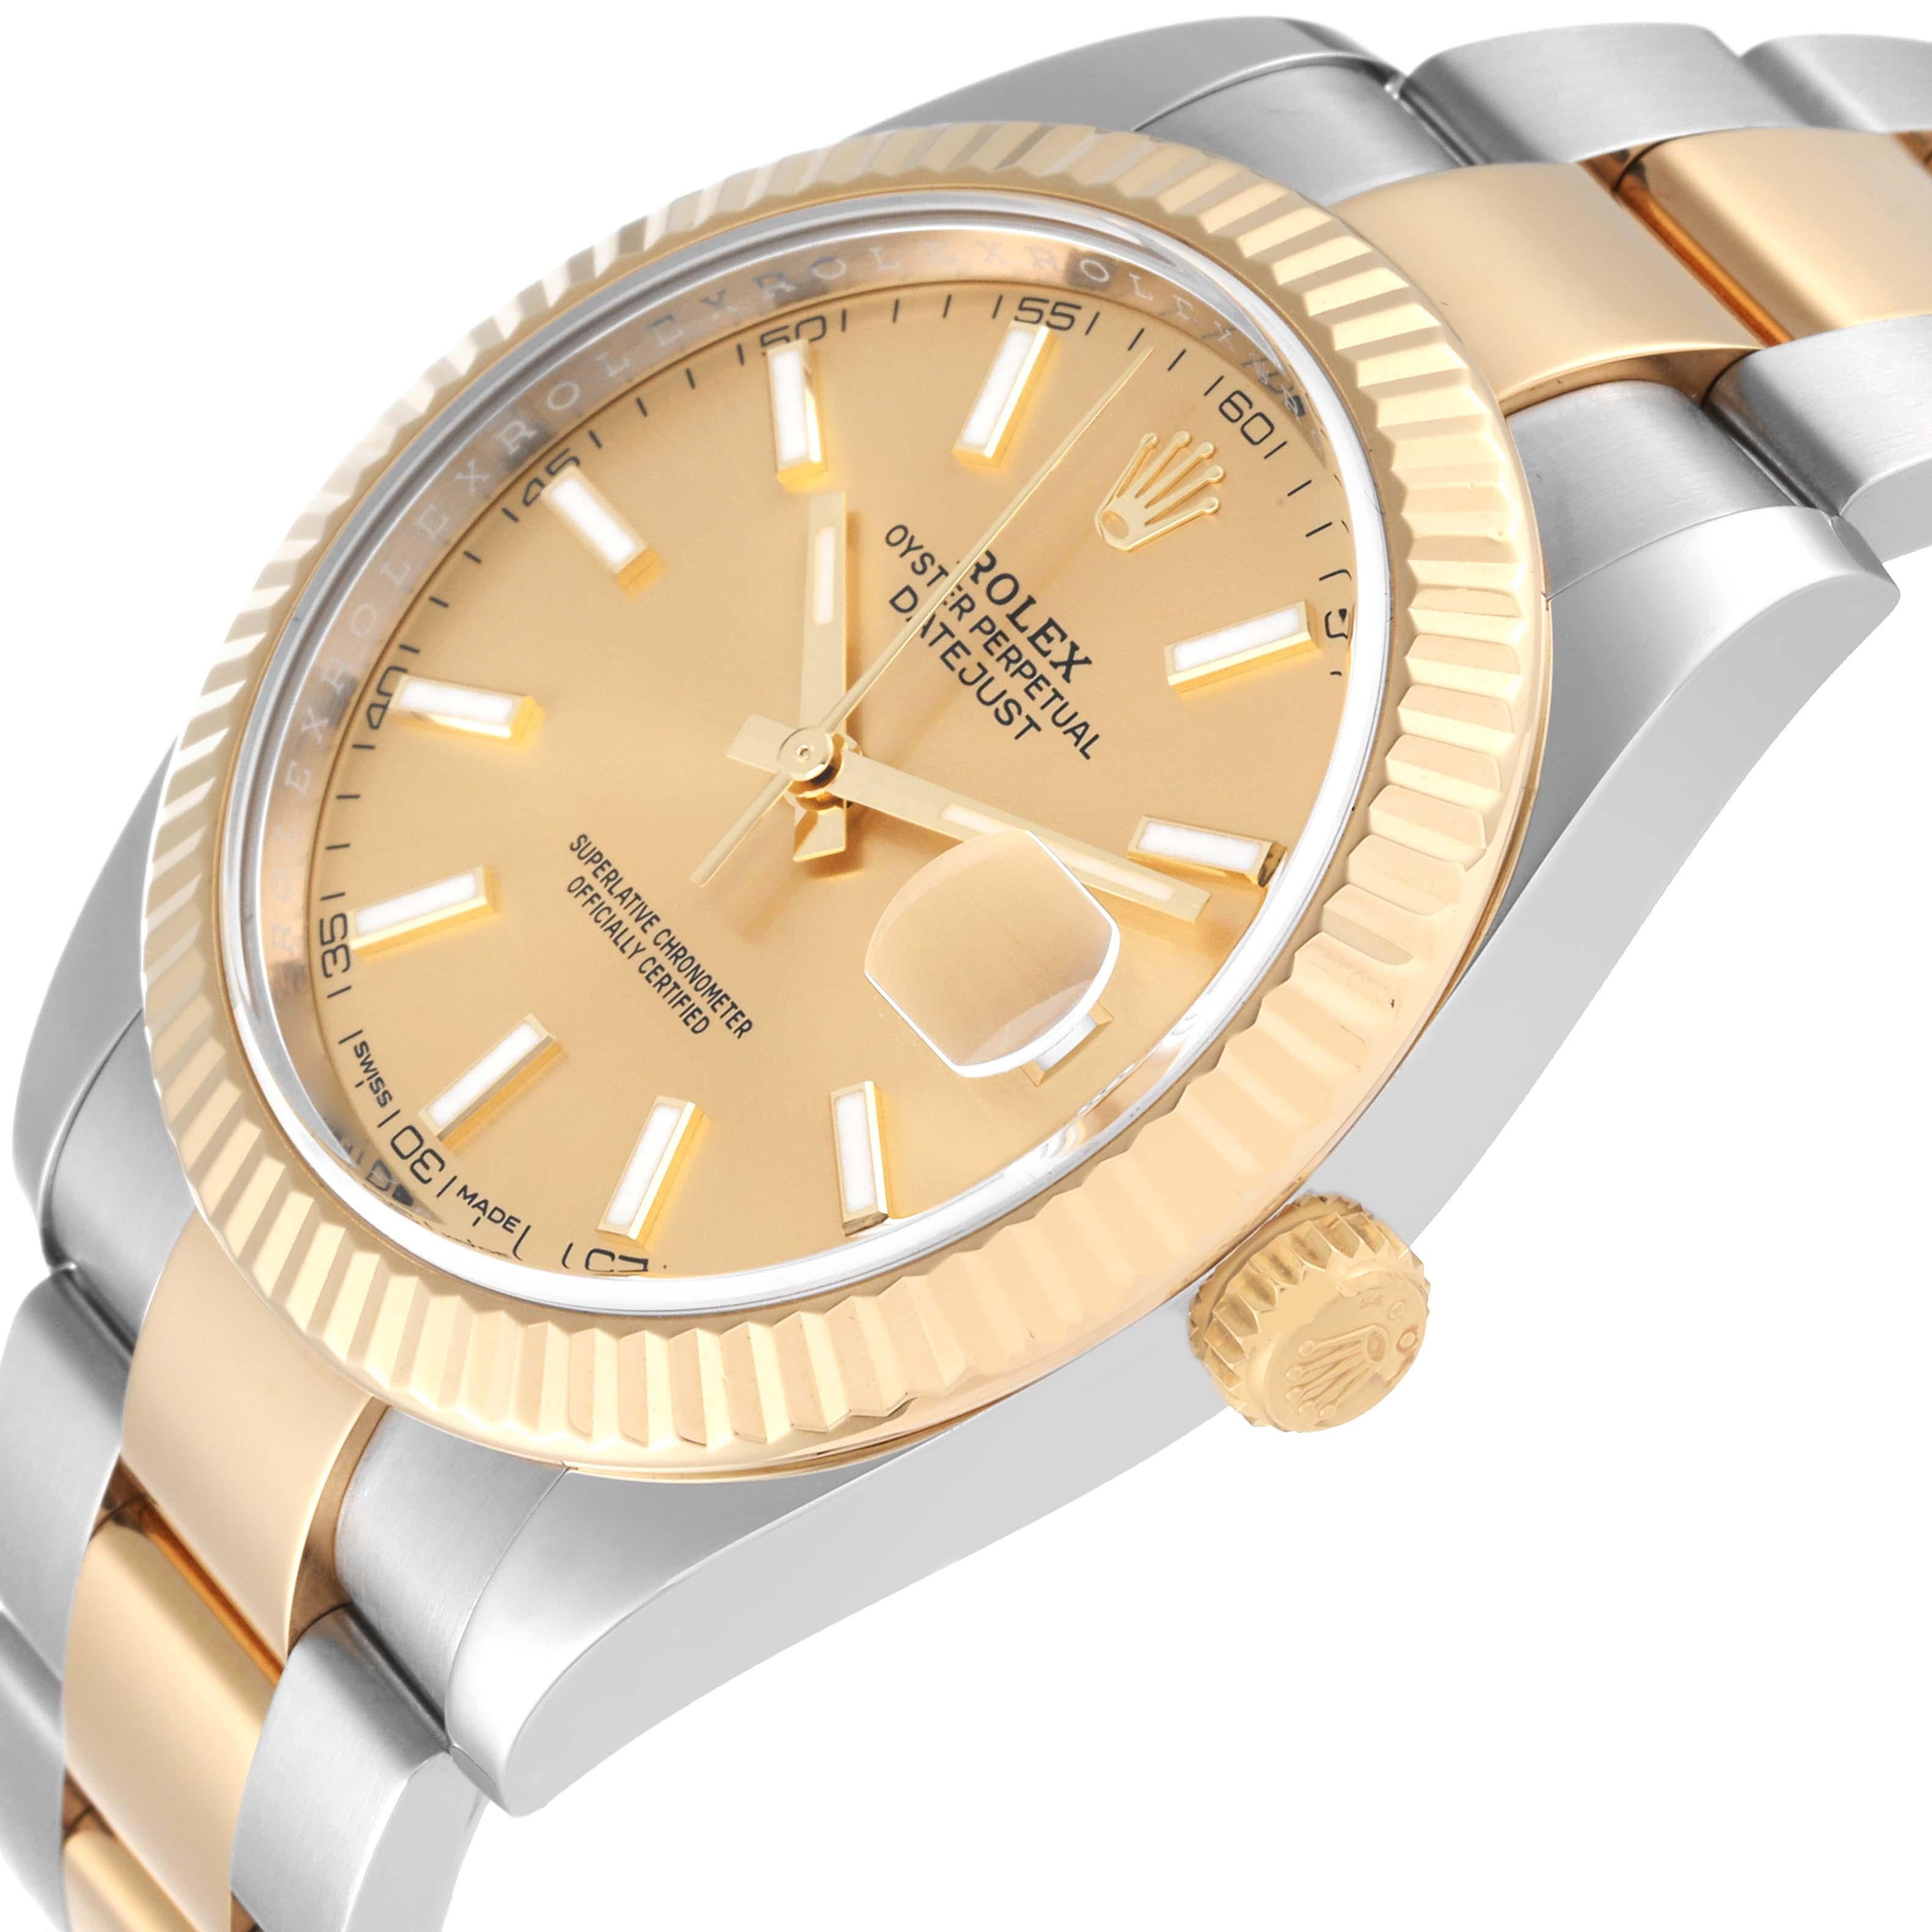 Rolex Datejust 41 Steel Yellow Gold Champagne Dial Mens Watch 126333 1